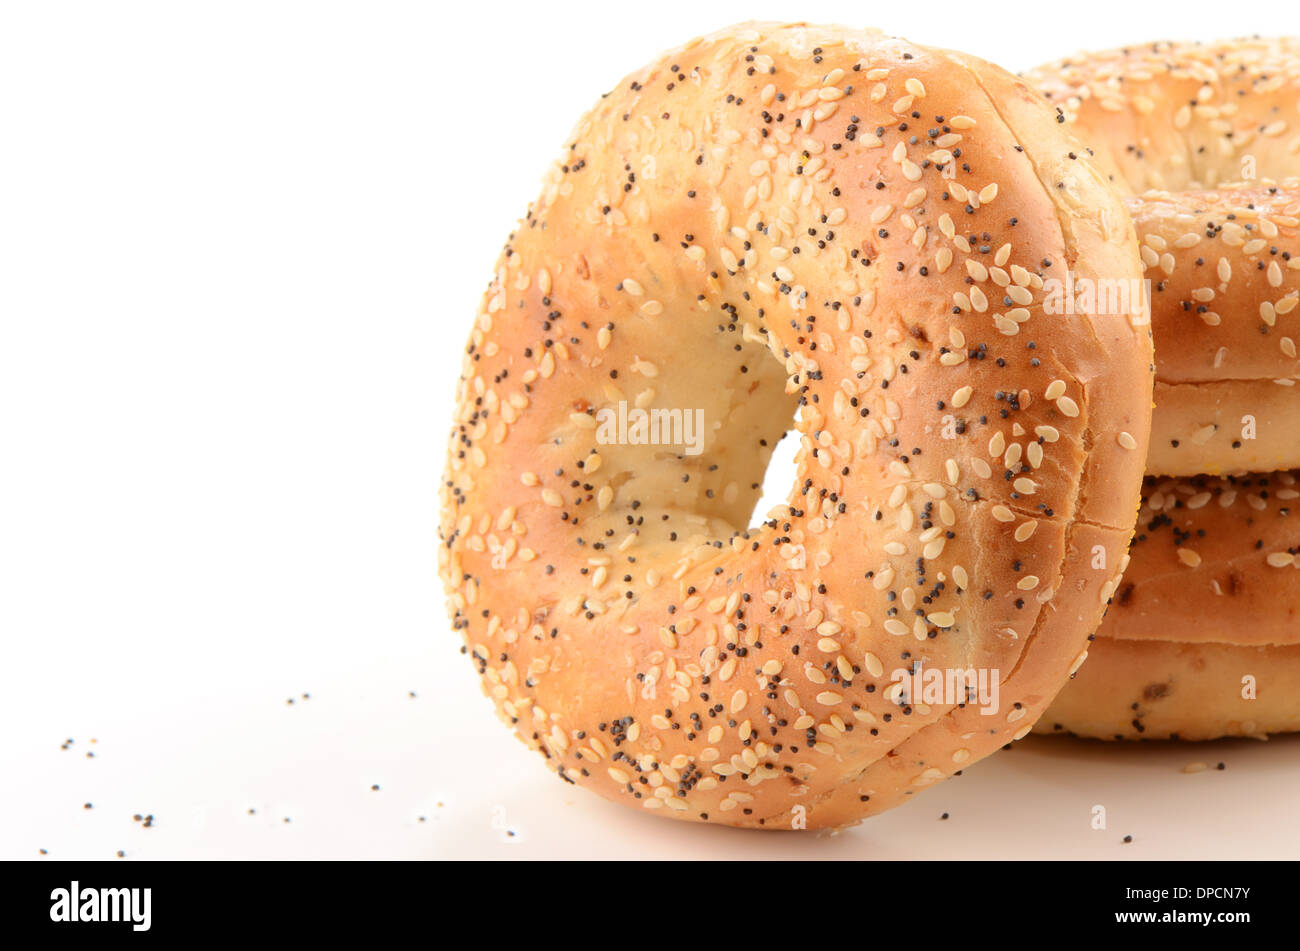 Poppy Seed And Sesame Seed Bagels On White Background With Room